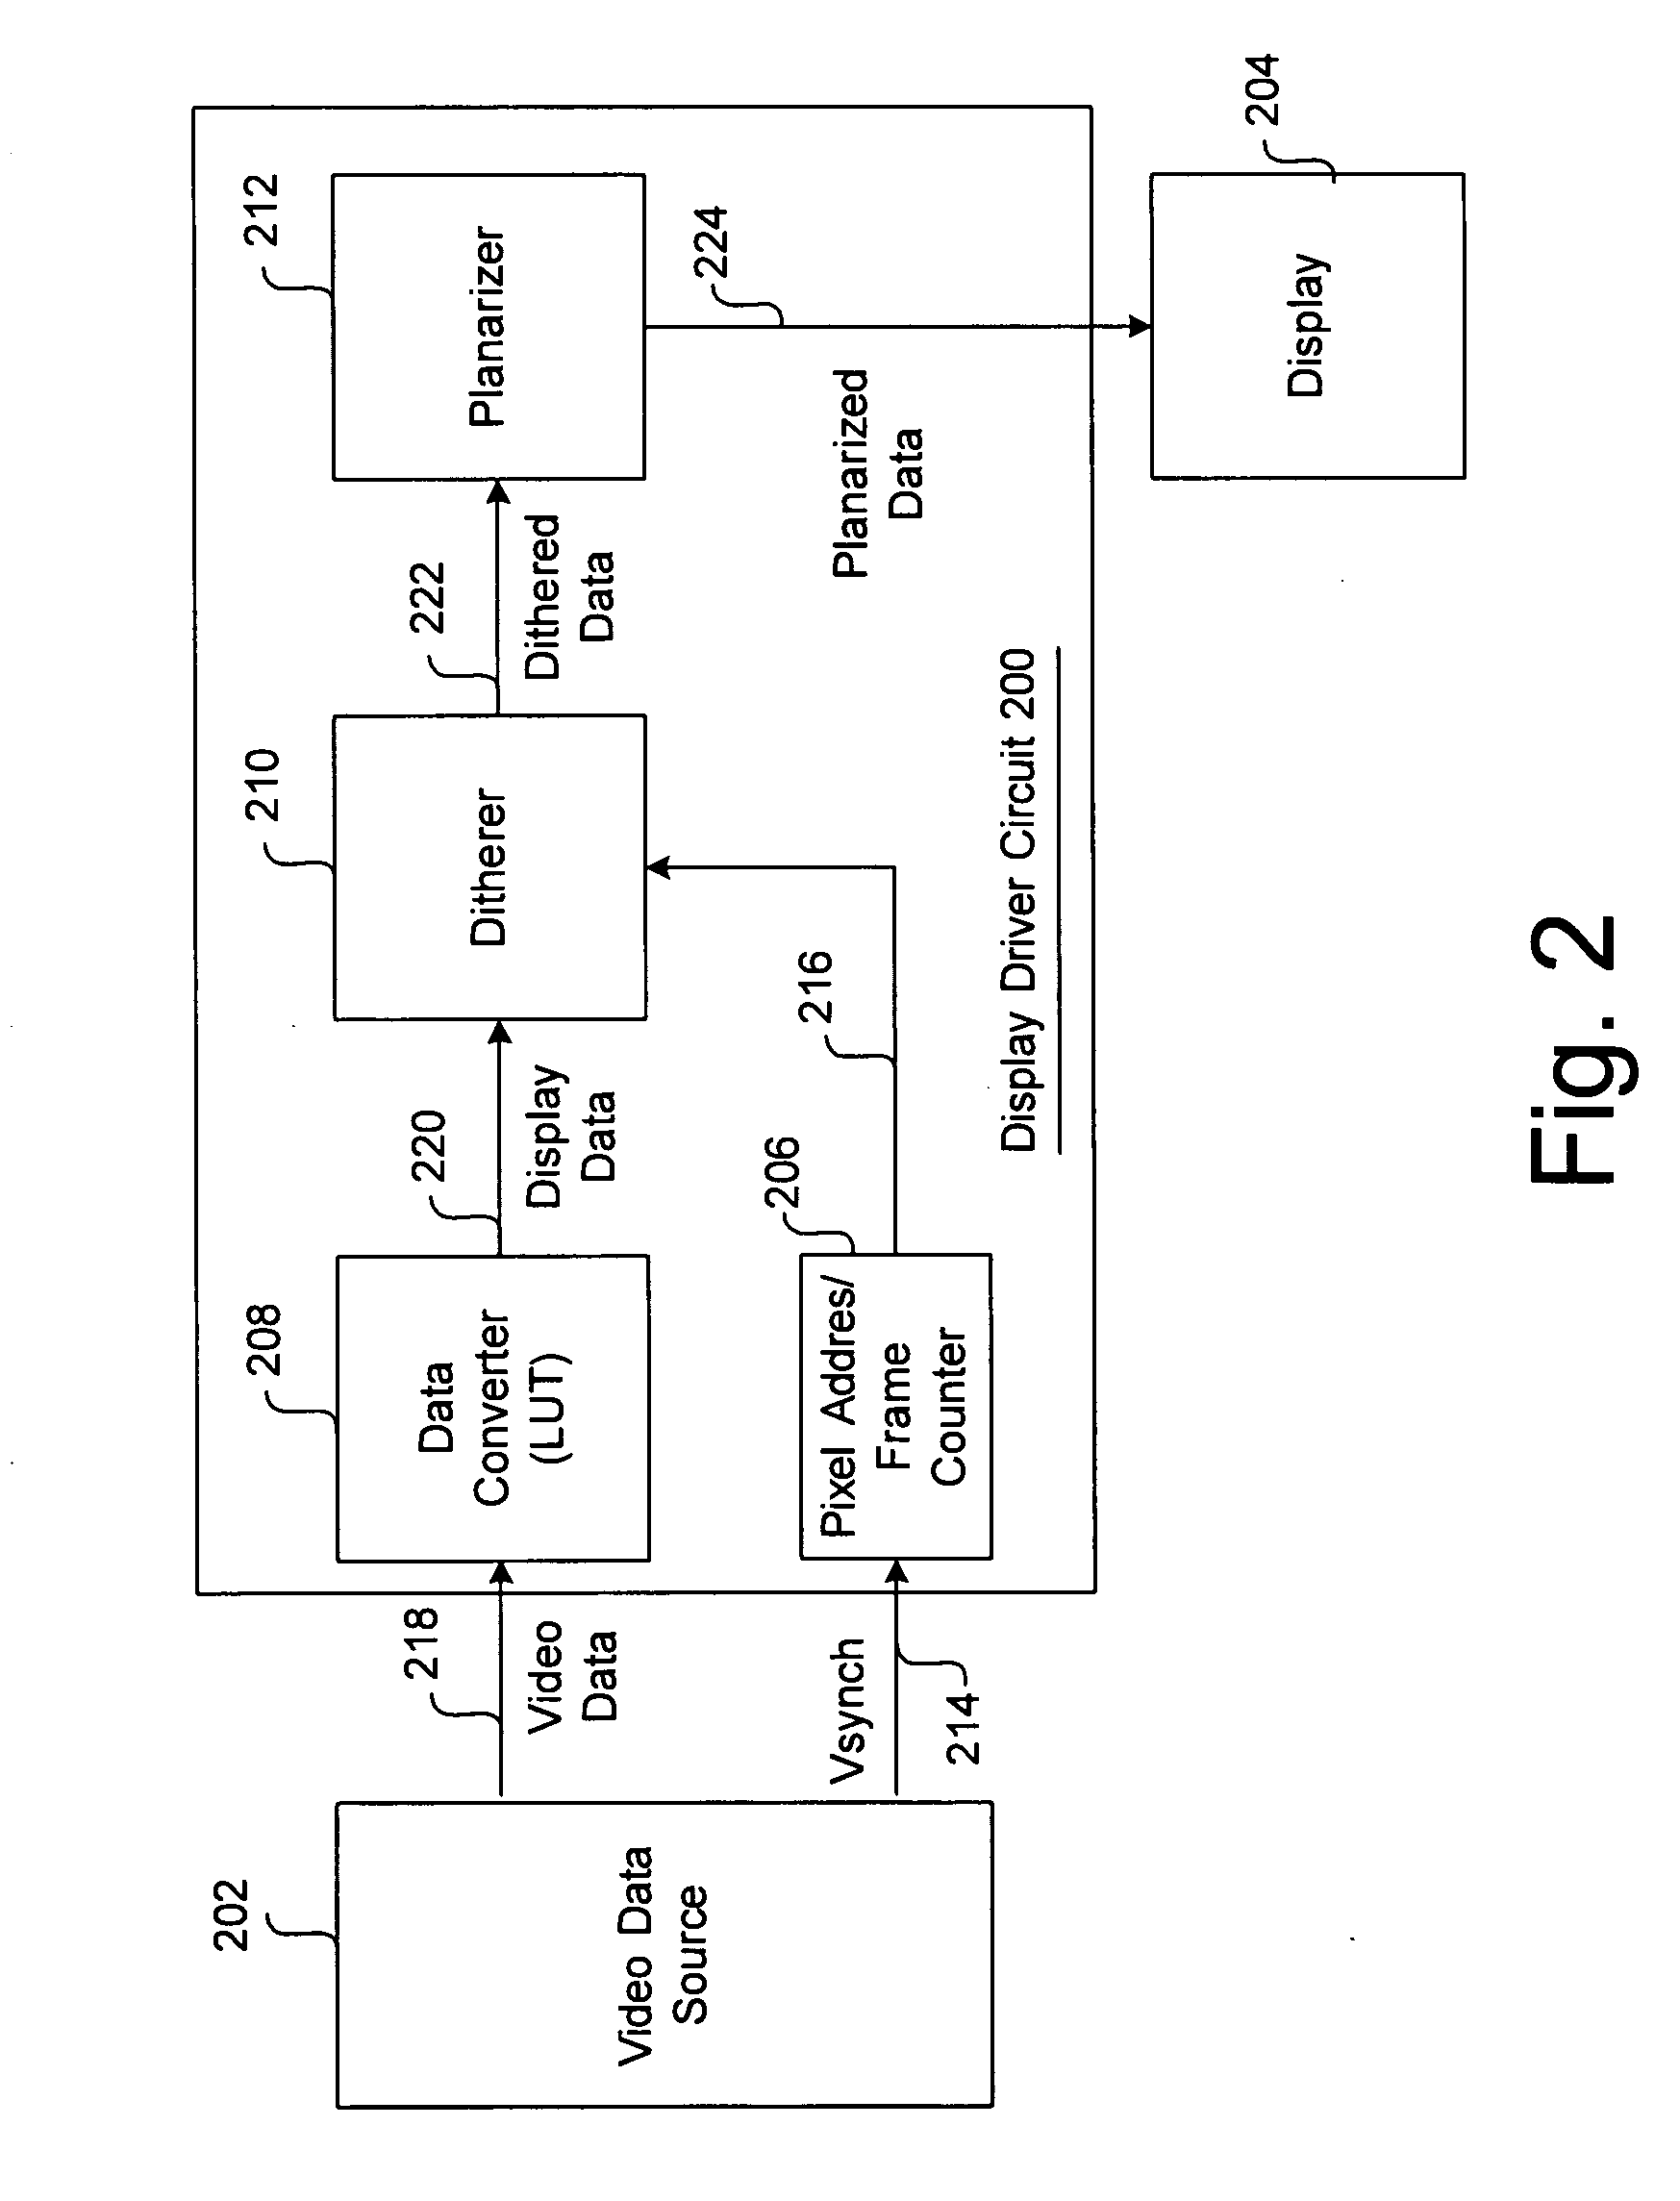 System and method for dithering video data